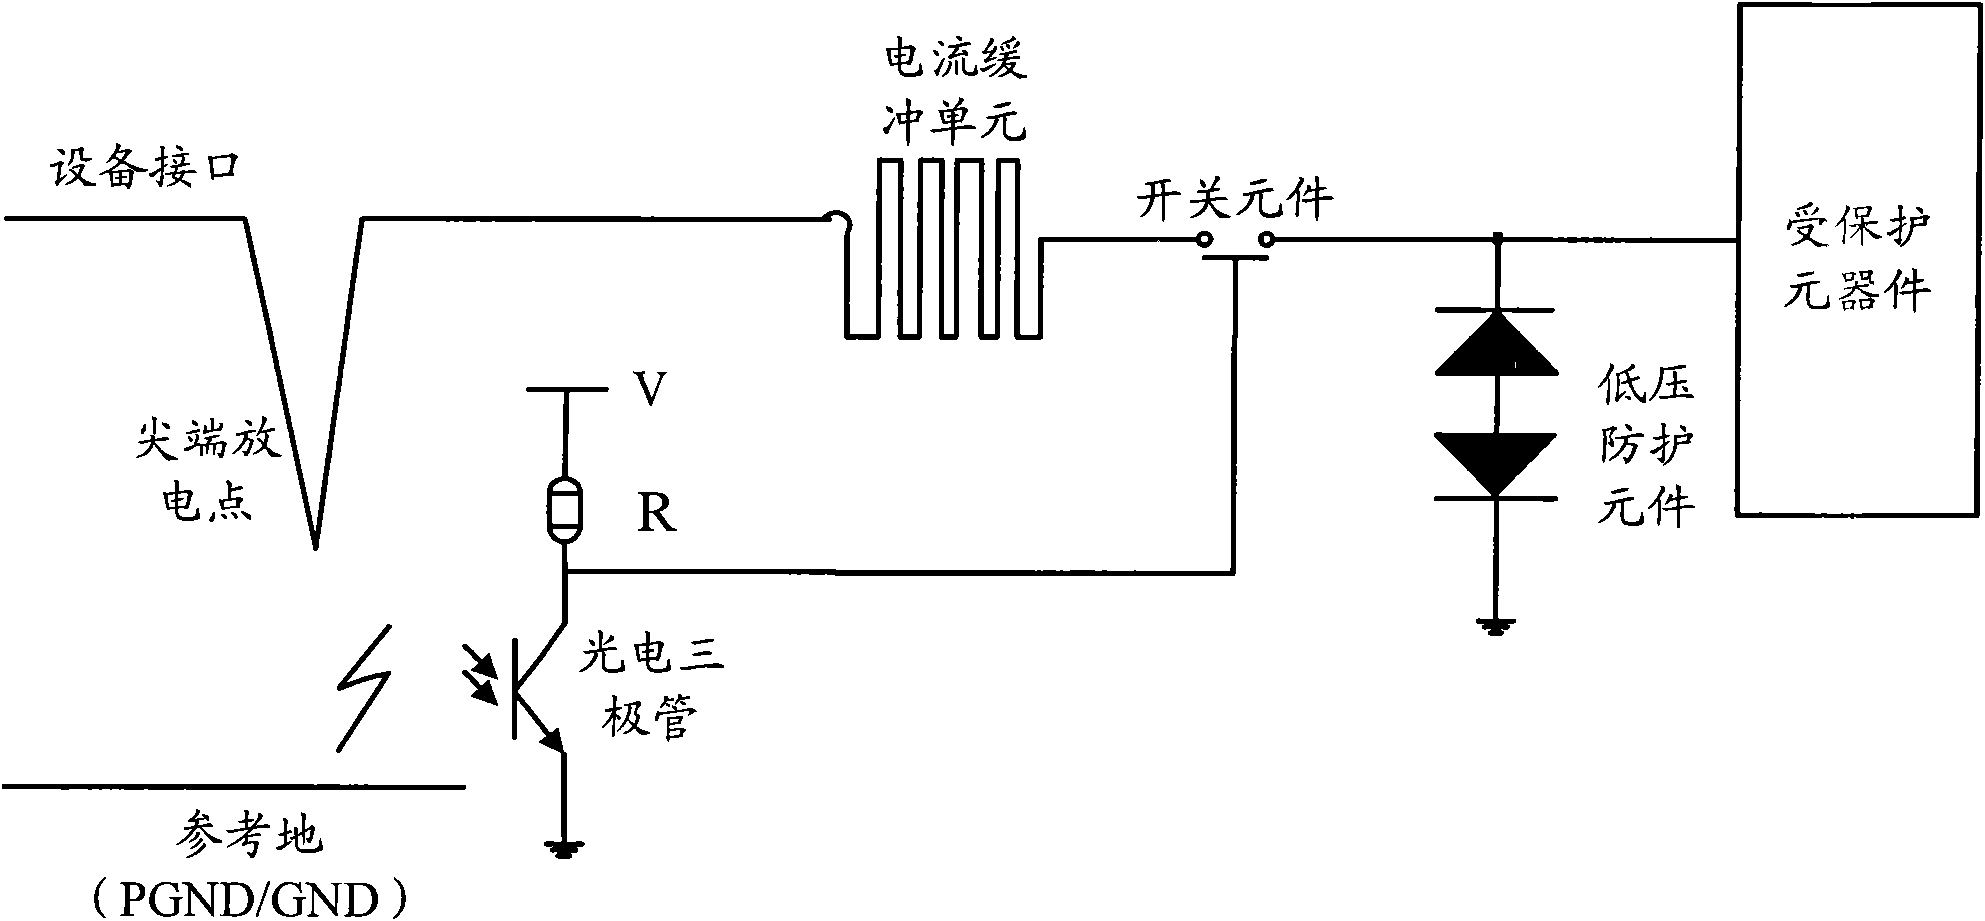 Interface anti-static method, anti-static protection circuit and electrical equipment